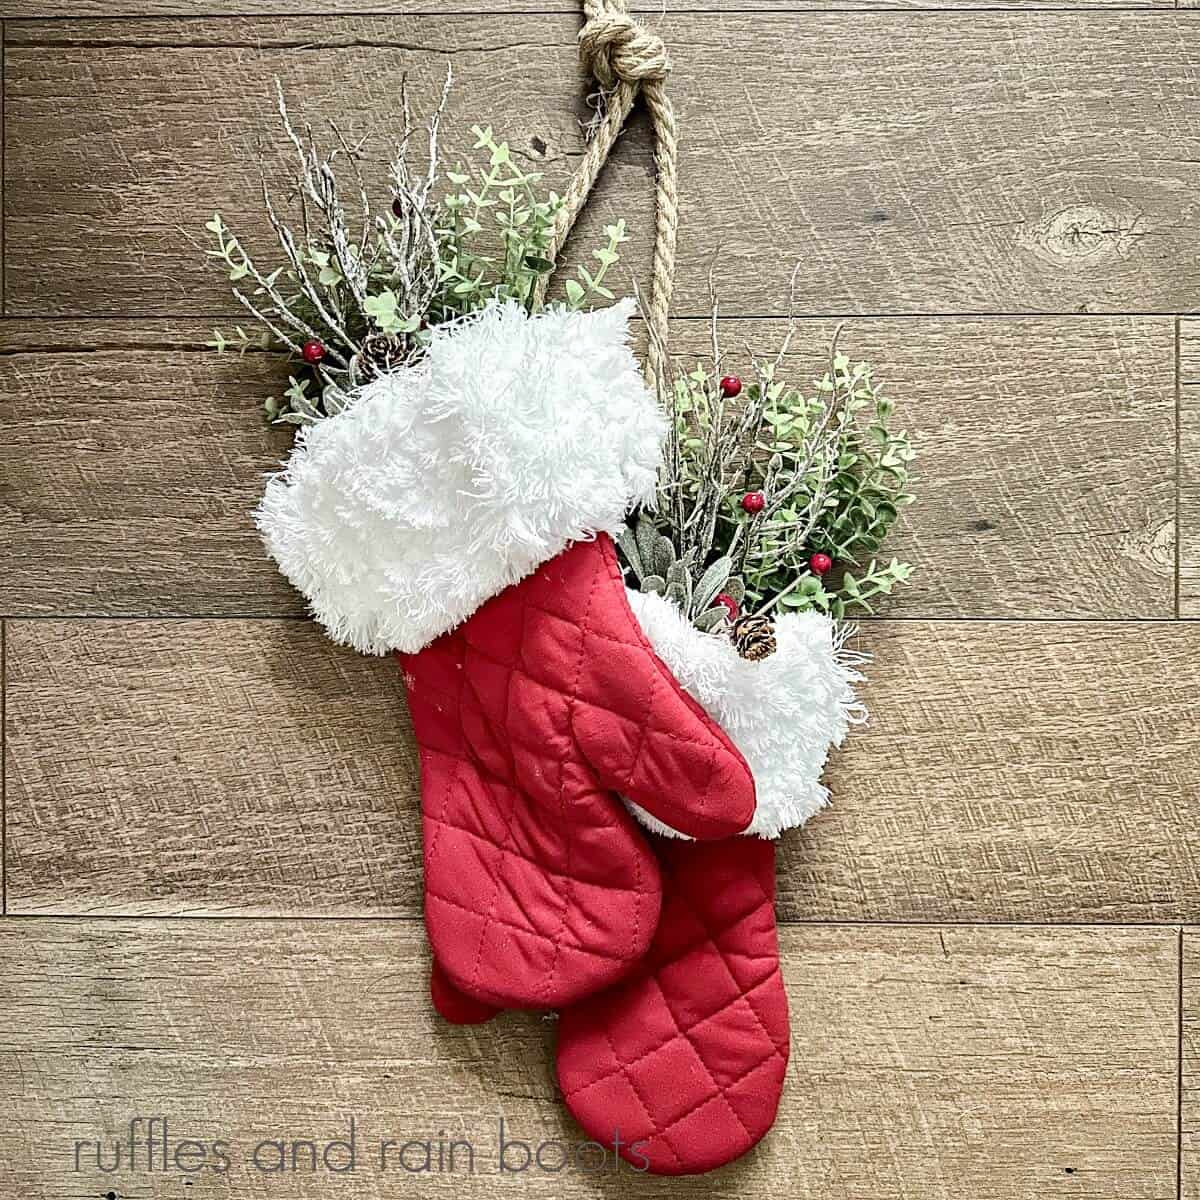 A close up image of a pair of red oven mitts made into Santa mittens with greenery inside hanging against a wooden surface.